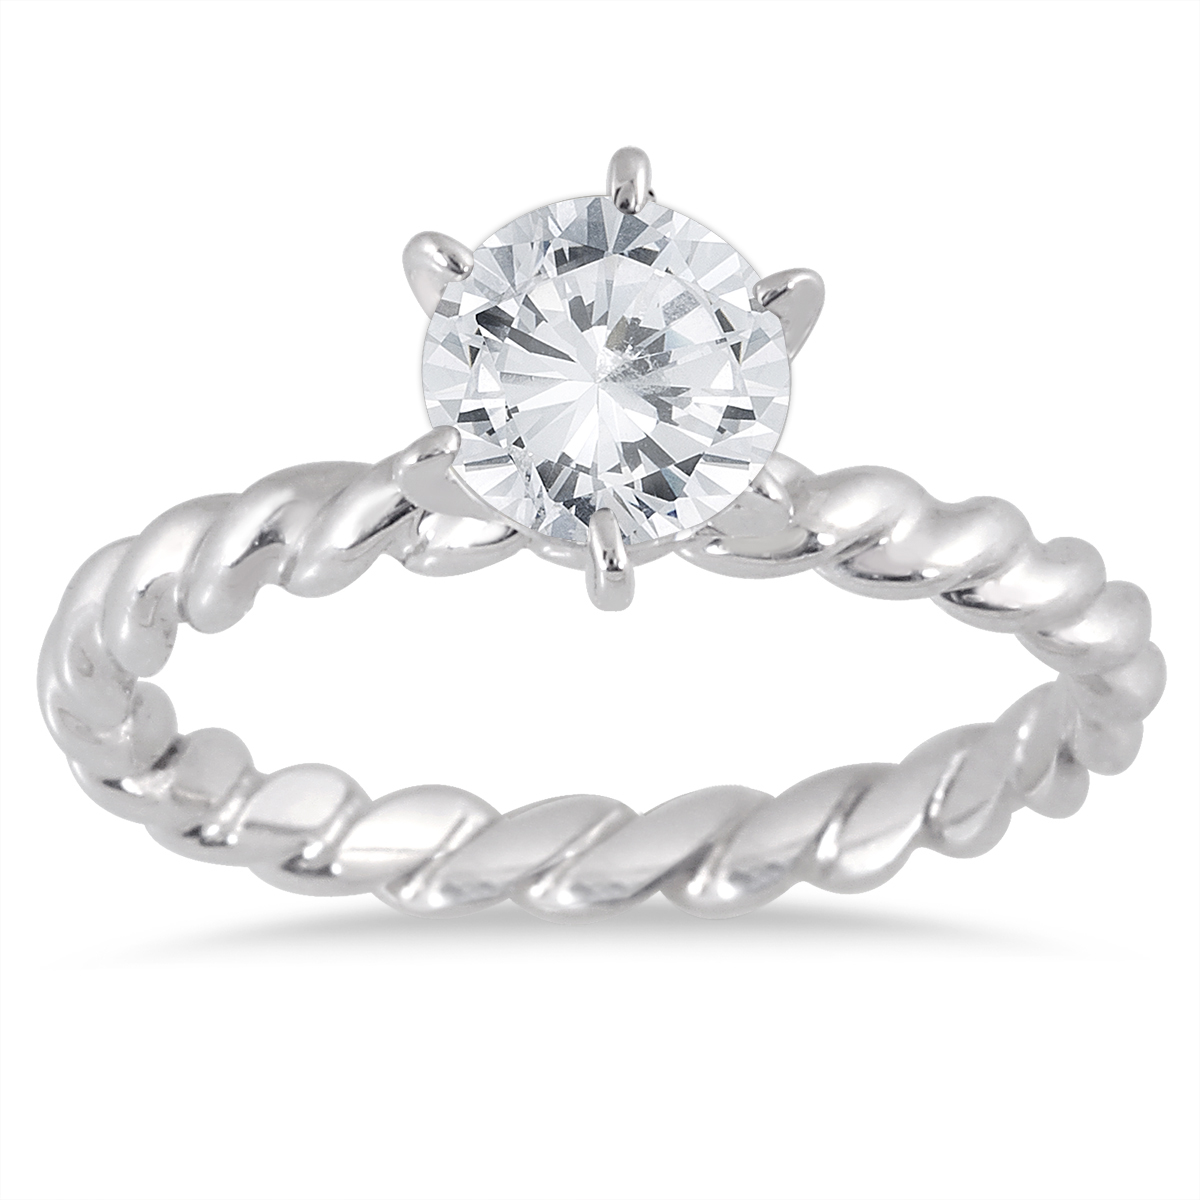 AGS Certified 1 Carat Braided Solitaire Diamond Ring in 14K White Gold (H-I Color, I1-I2 Clarity)